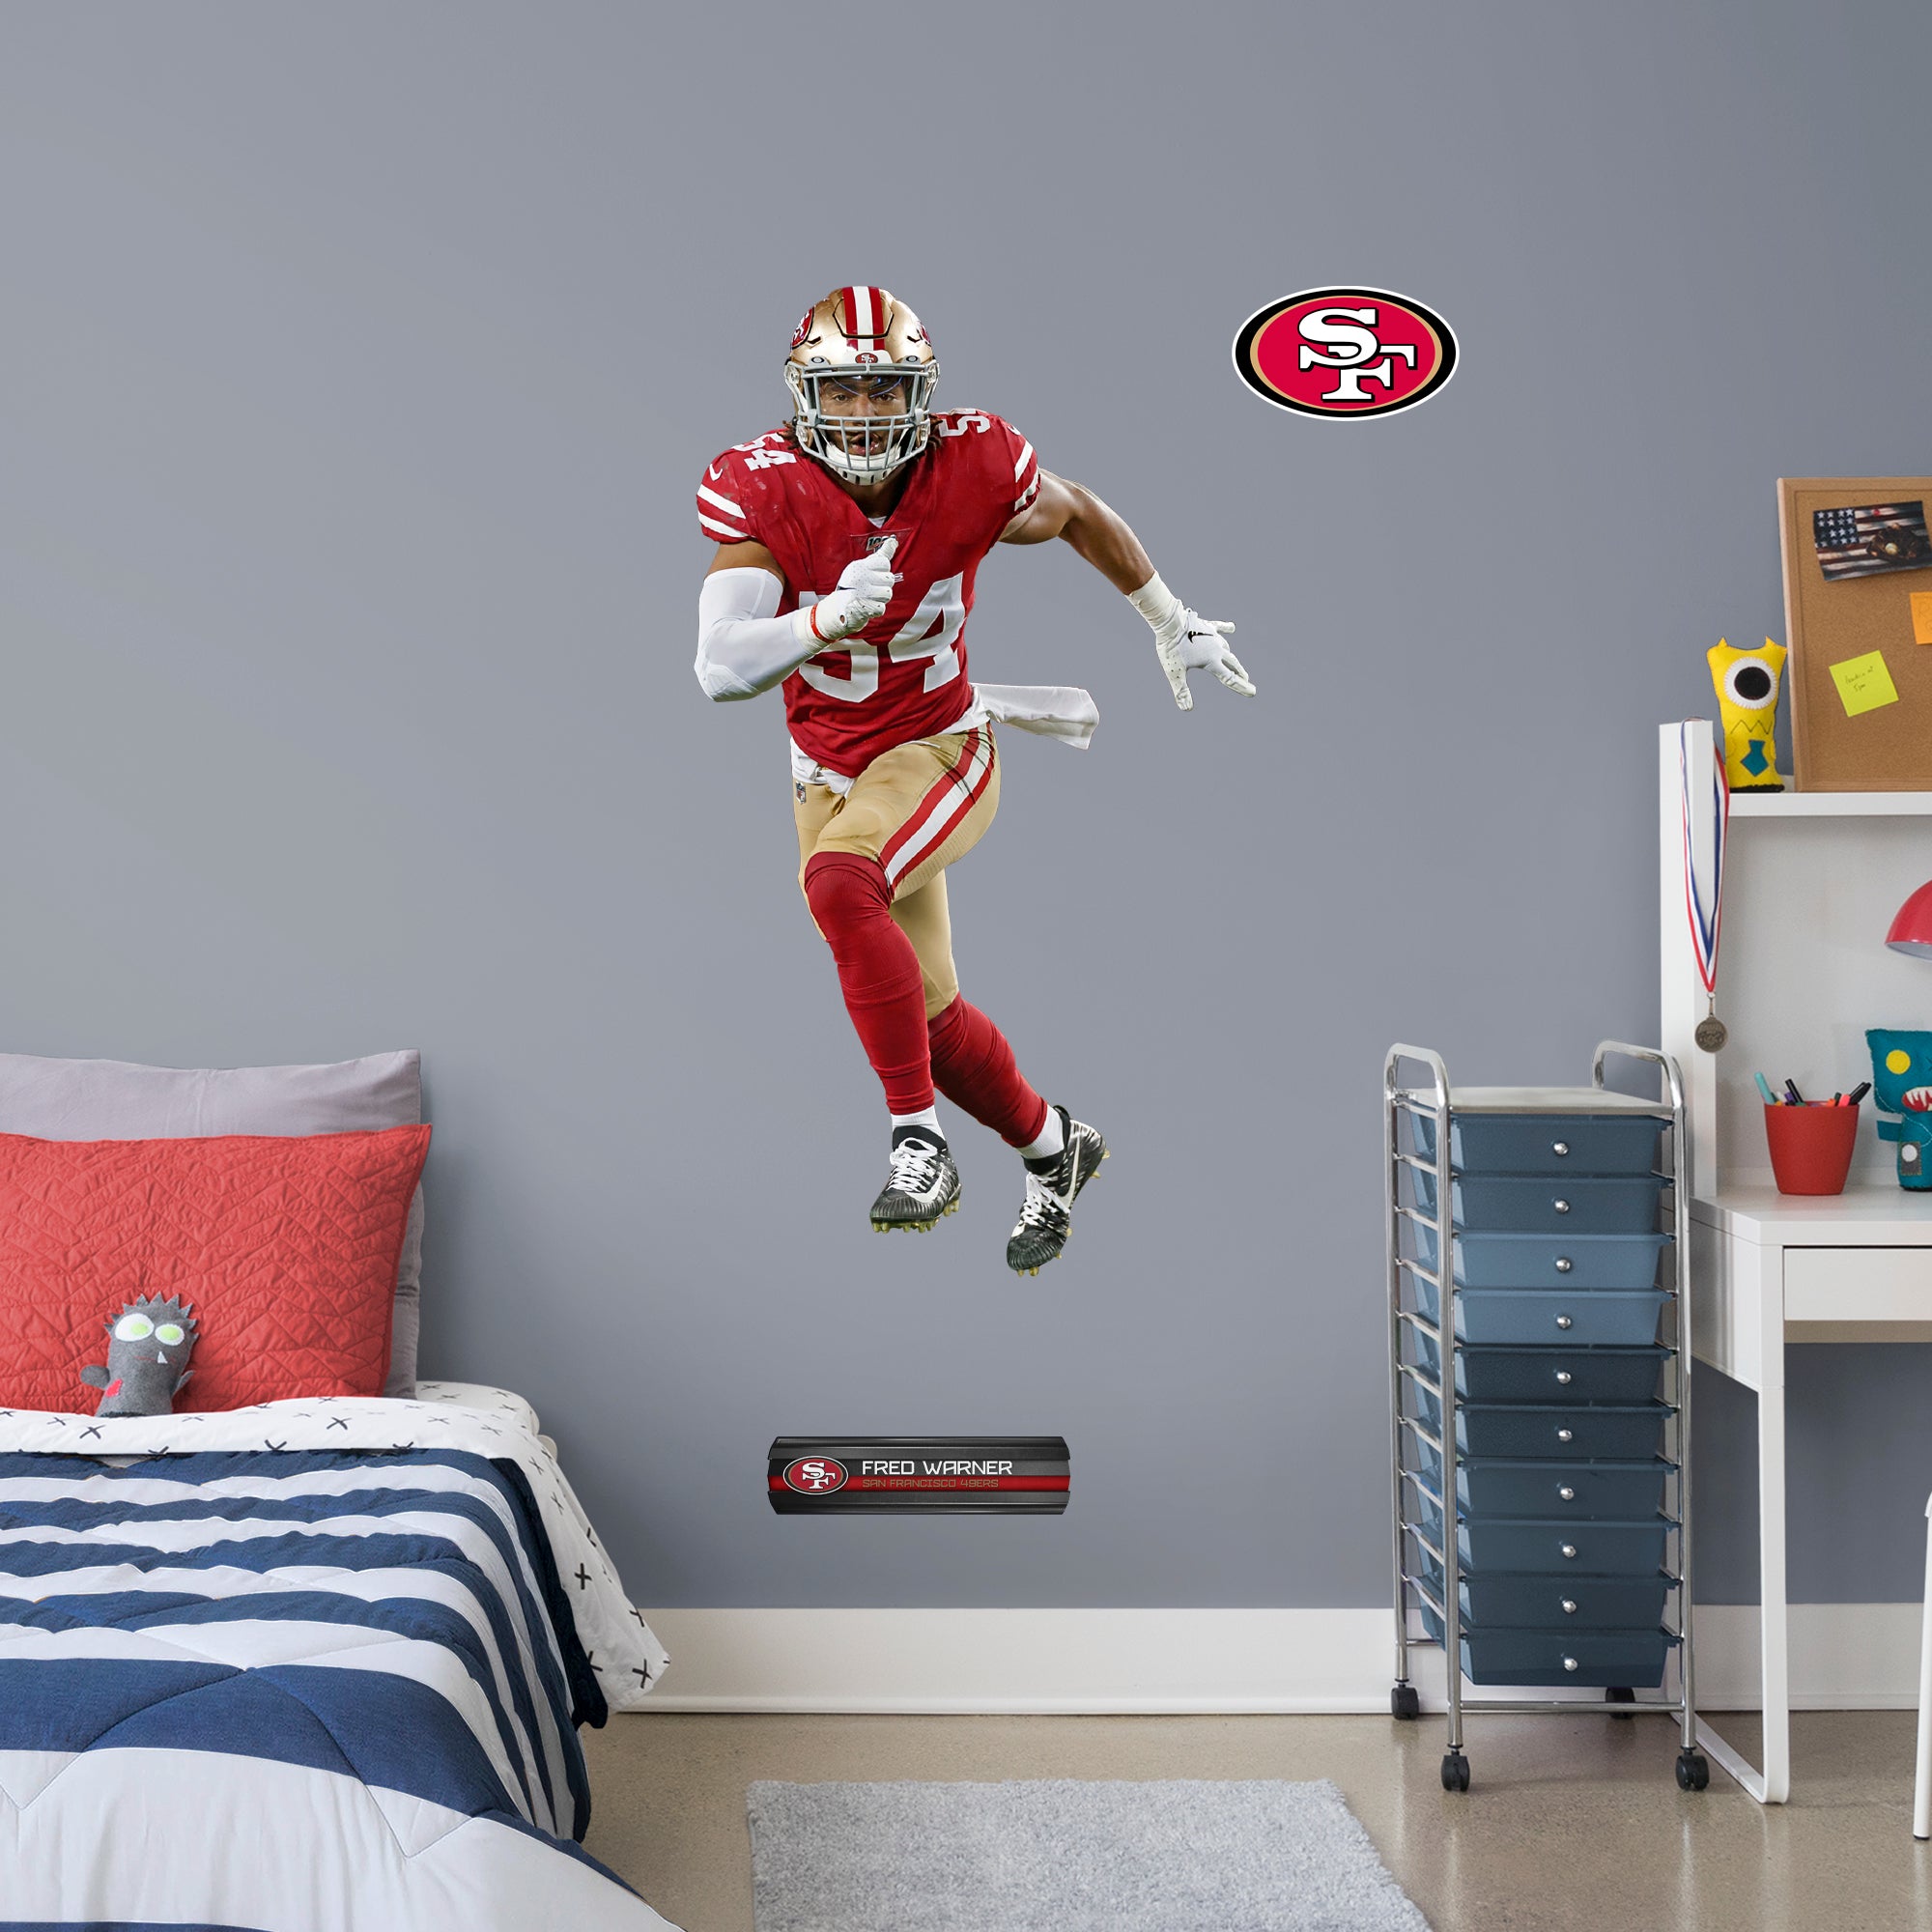 Fred Warner 2020 - Officially Licensed NFL Removable Wall Decal Giant Athlete + 2 Decals (29"W x 50"H) by Fathead | Vinyl